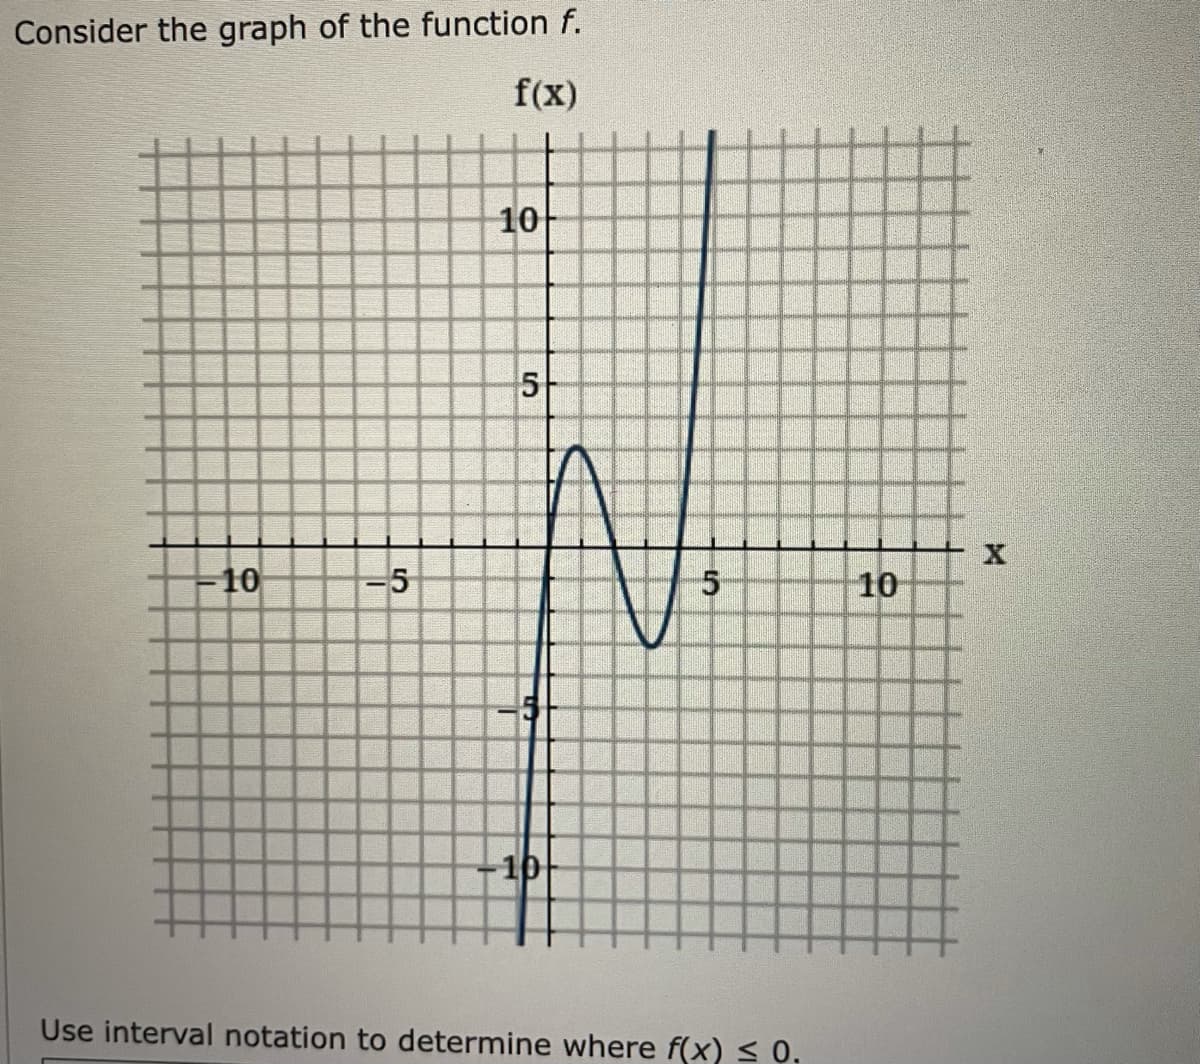 Consider the graph of the function f.
f(x)
-10
-5
10
5
-10
5
Use interval notation to determine where f(x) ≤ 0.
10